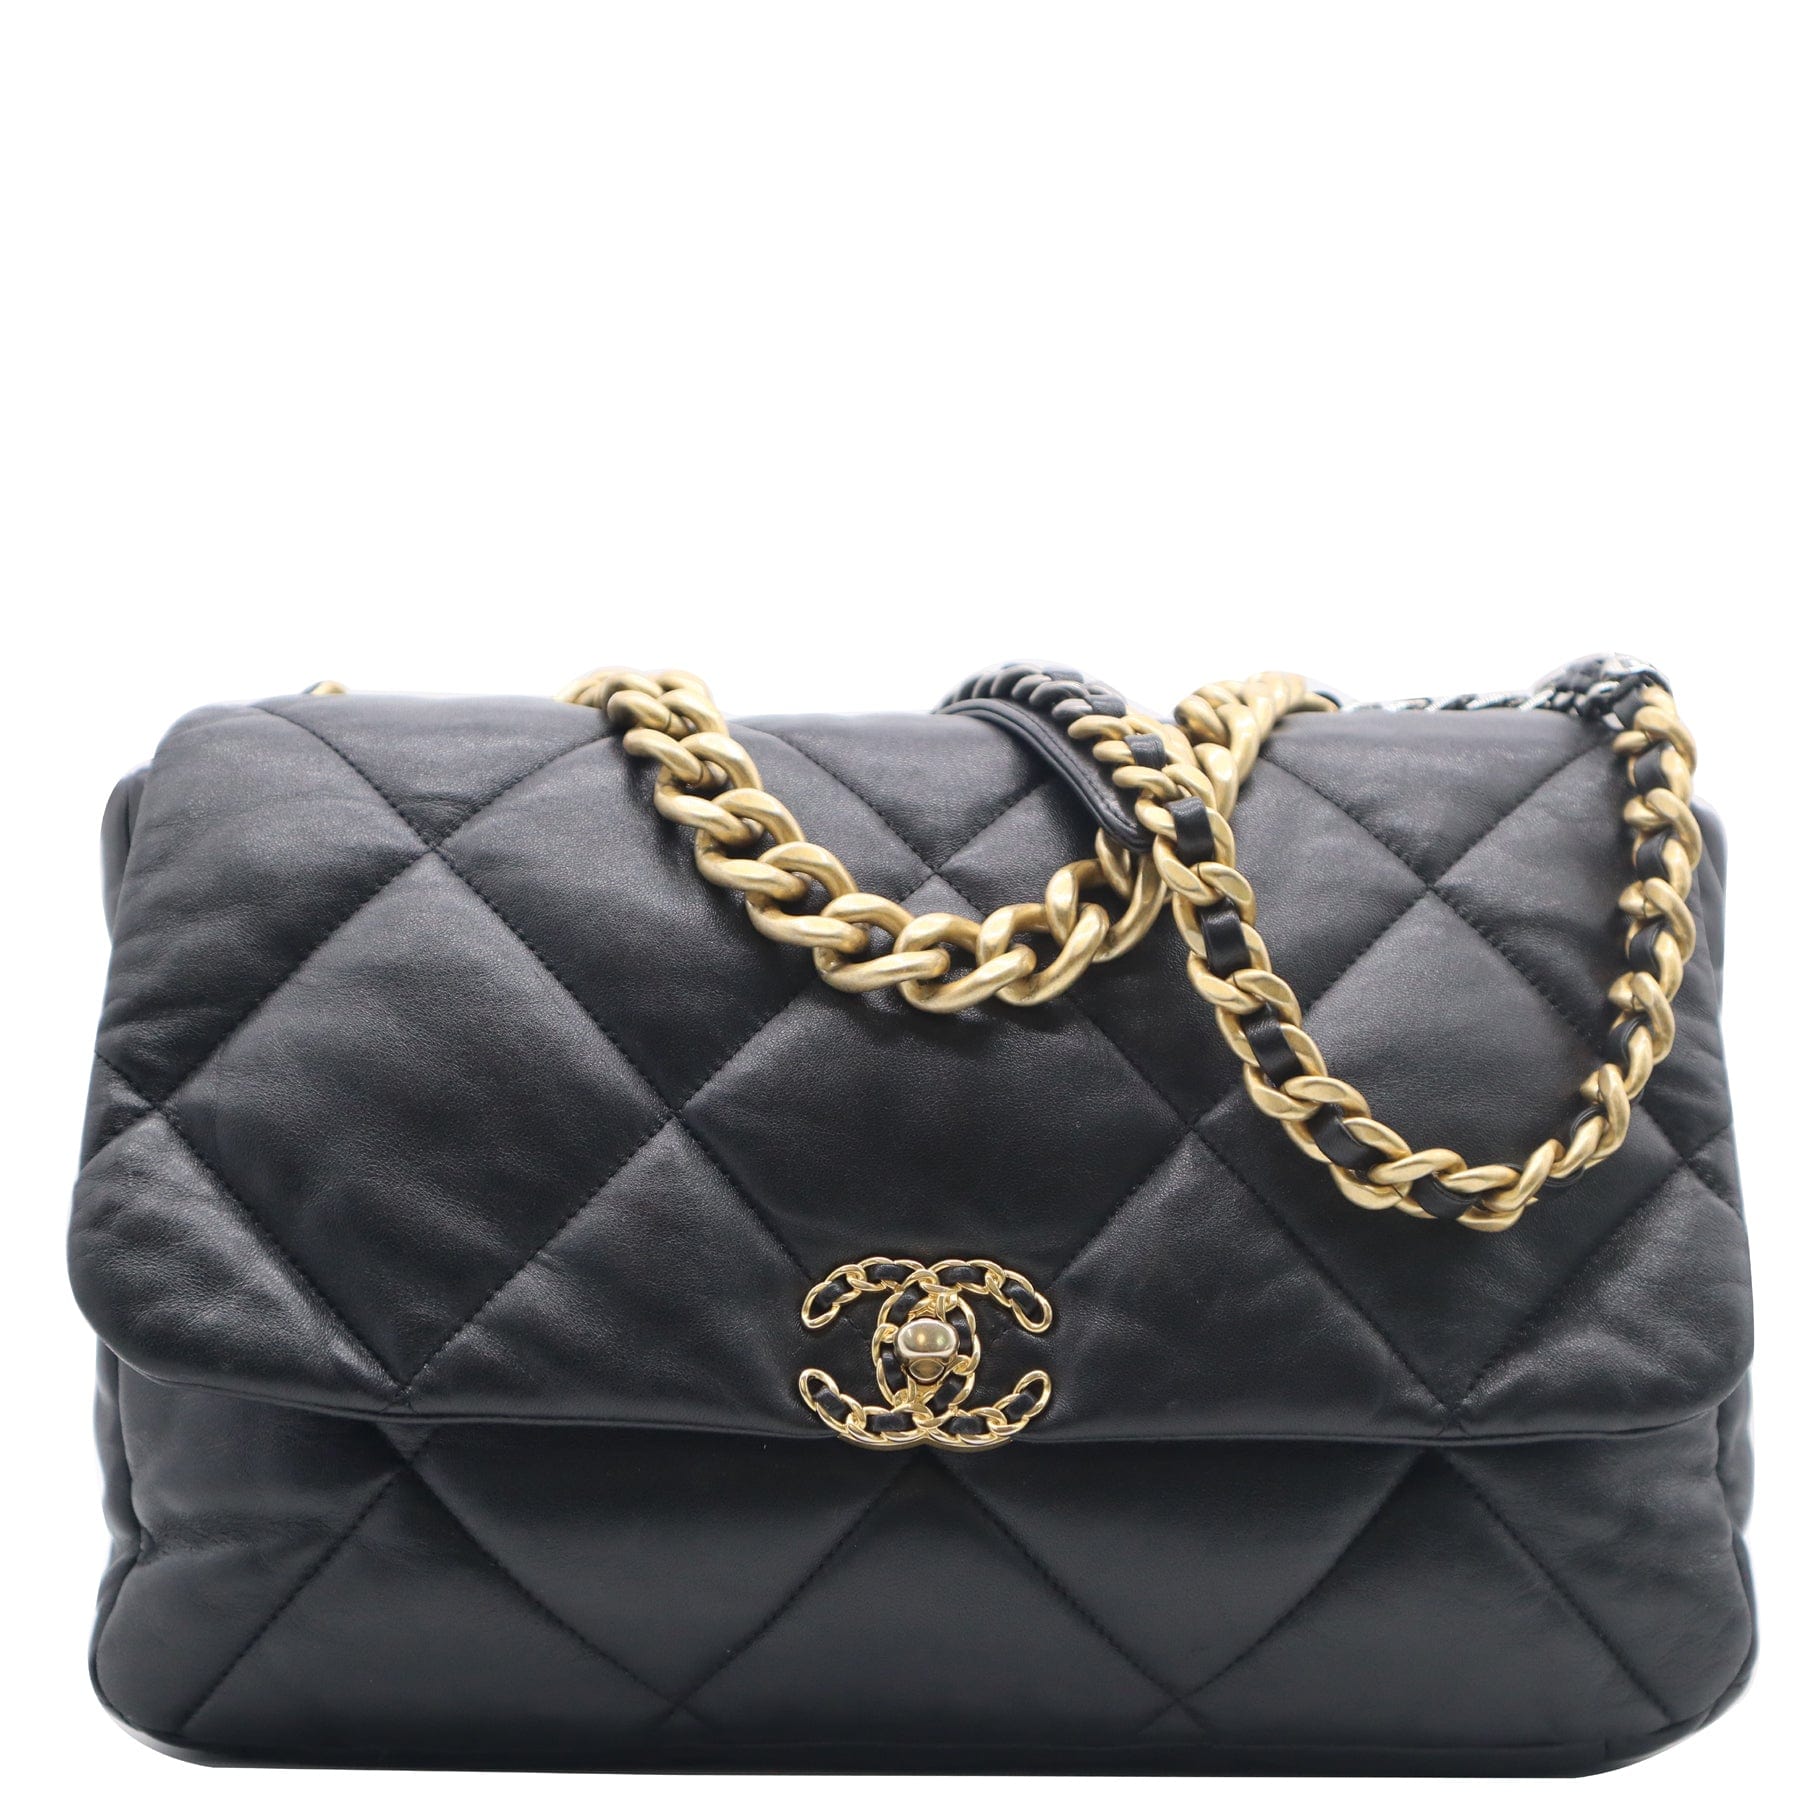 Chanel 19 Flap Bag Quilted Leather Medium - ShopStyle